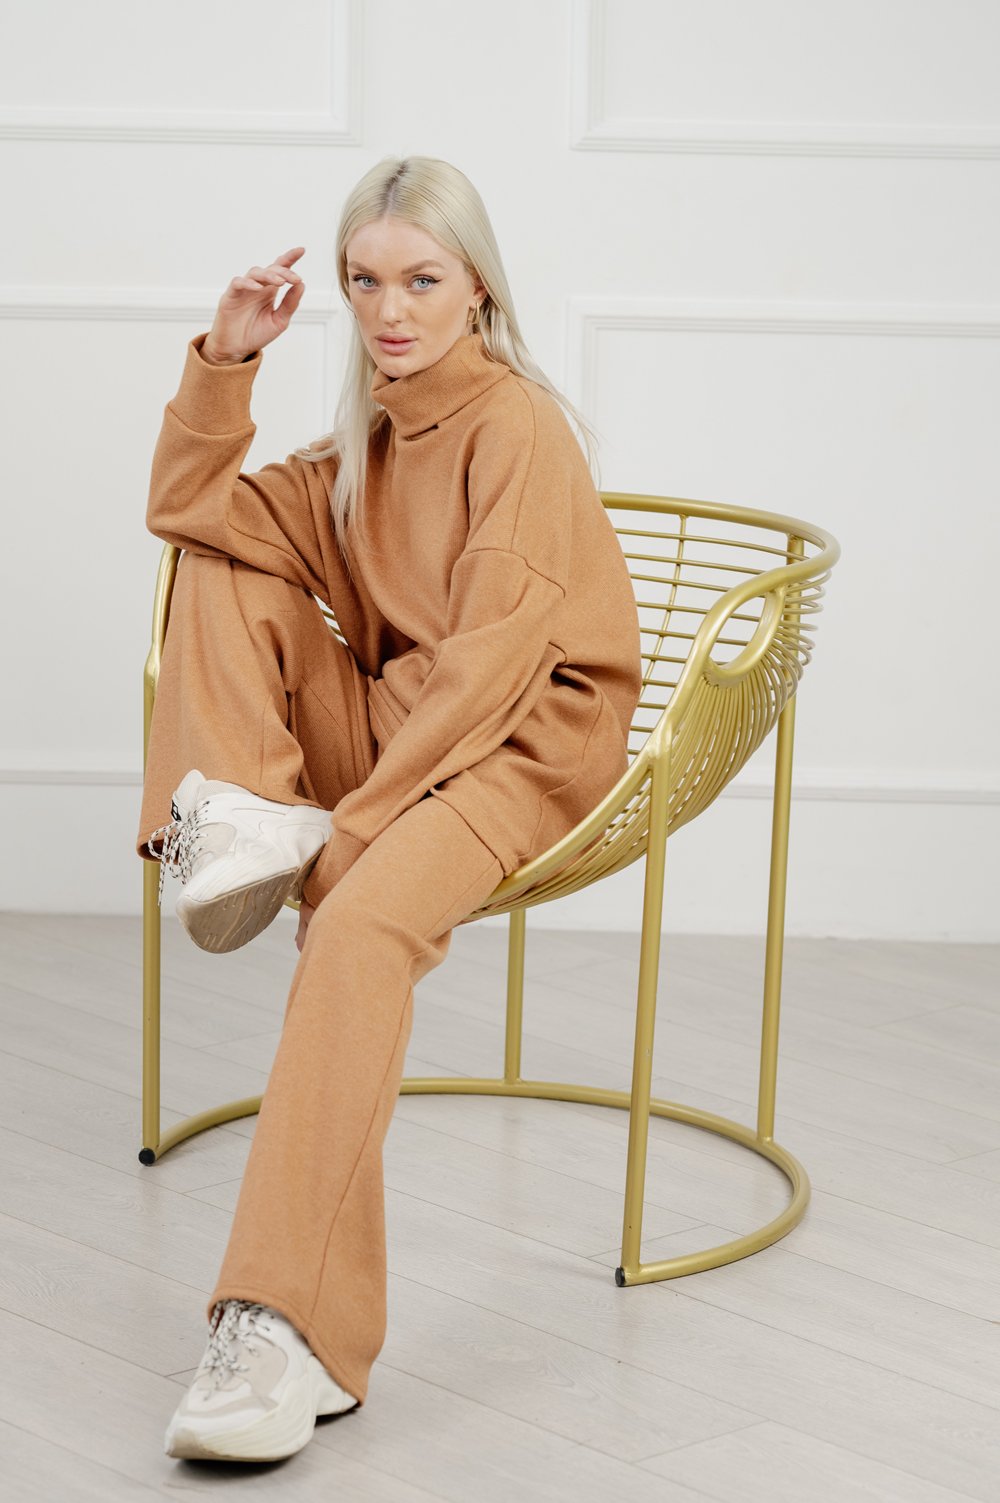 Warm angora suit in color 